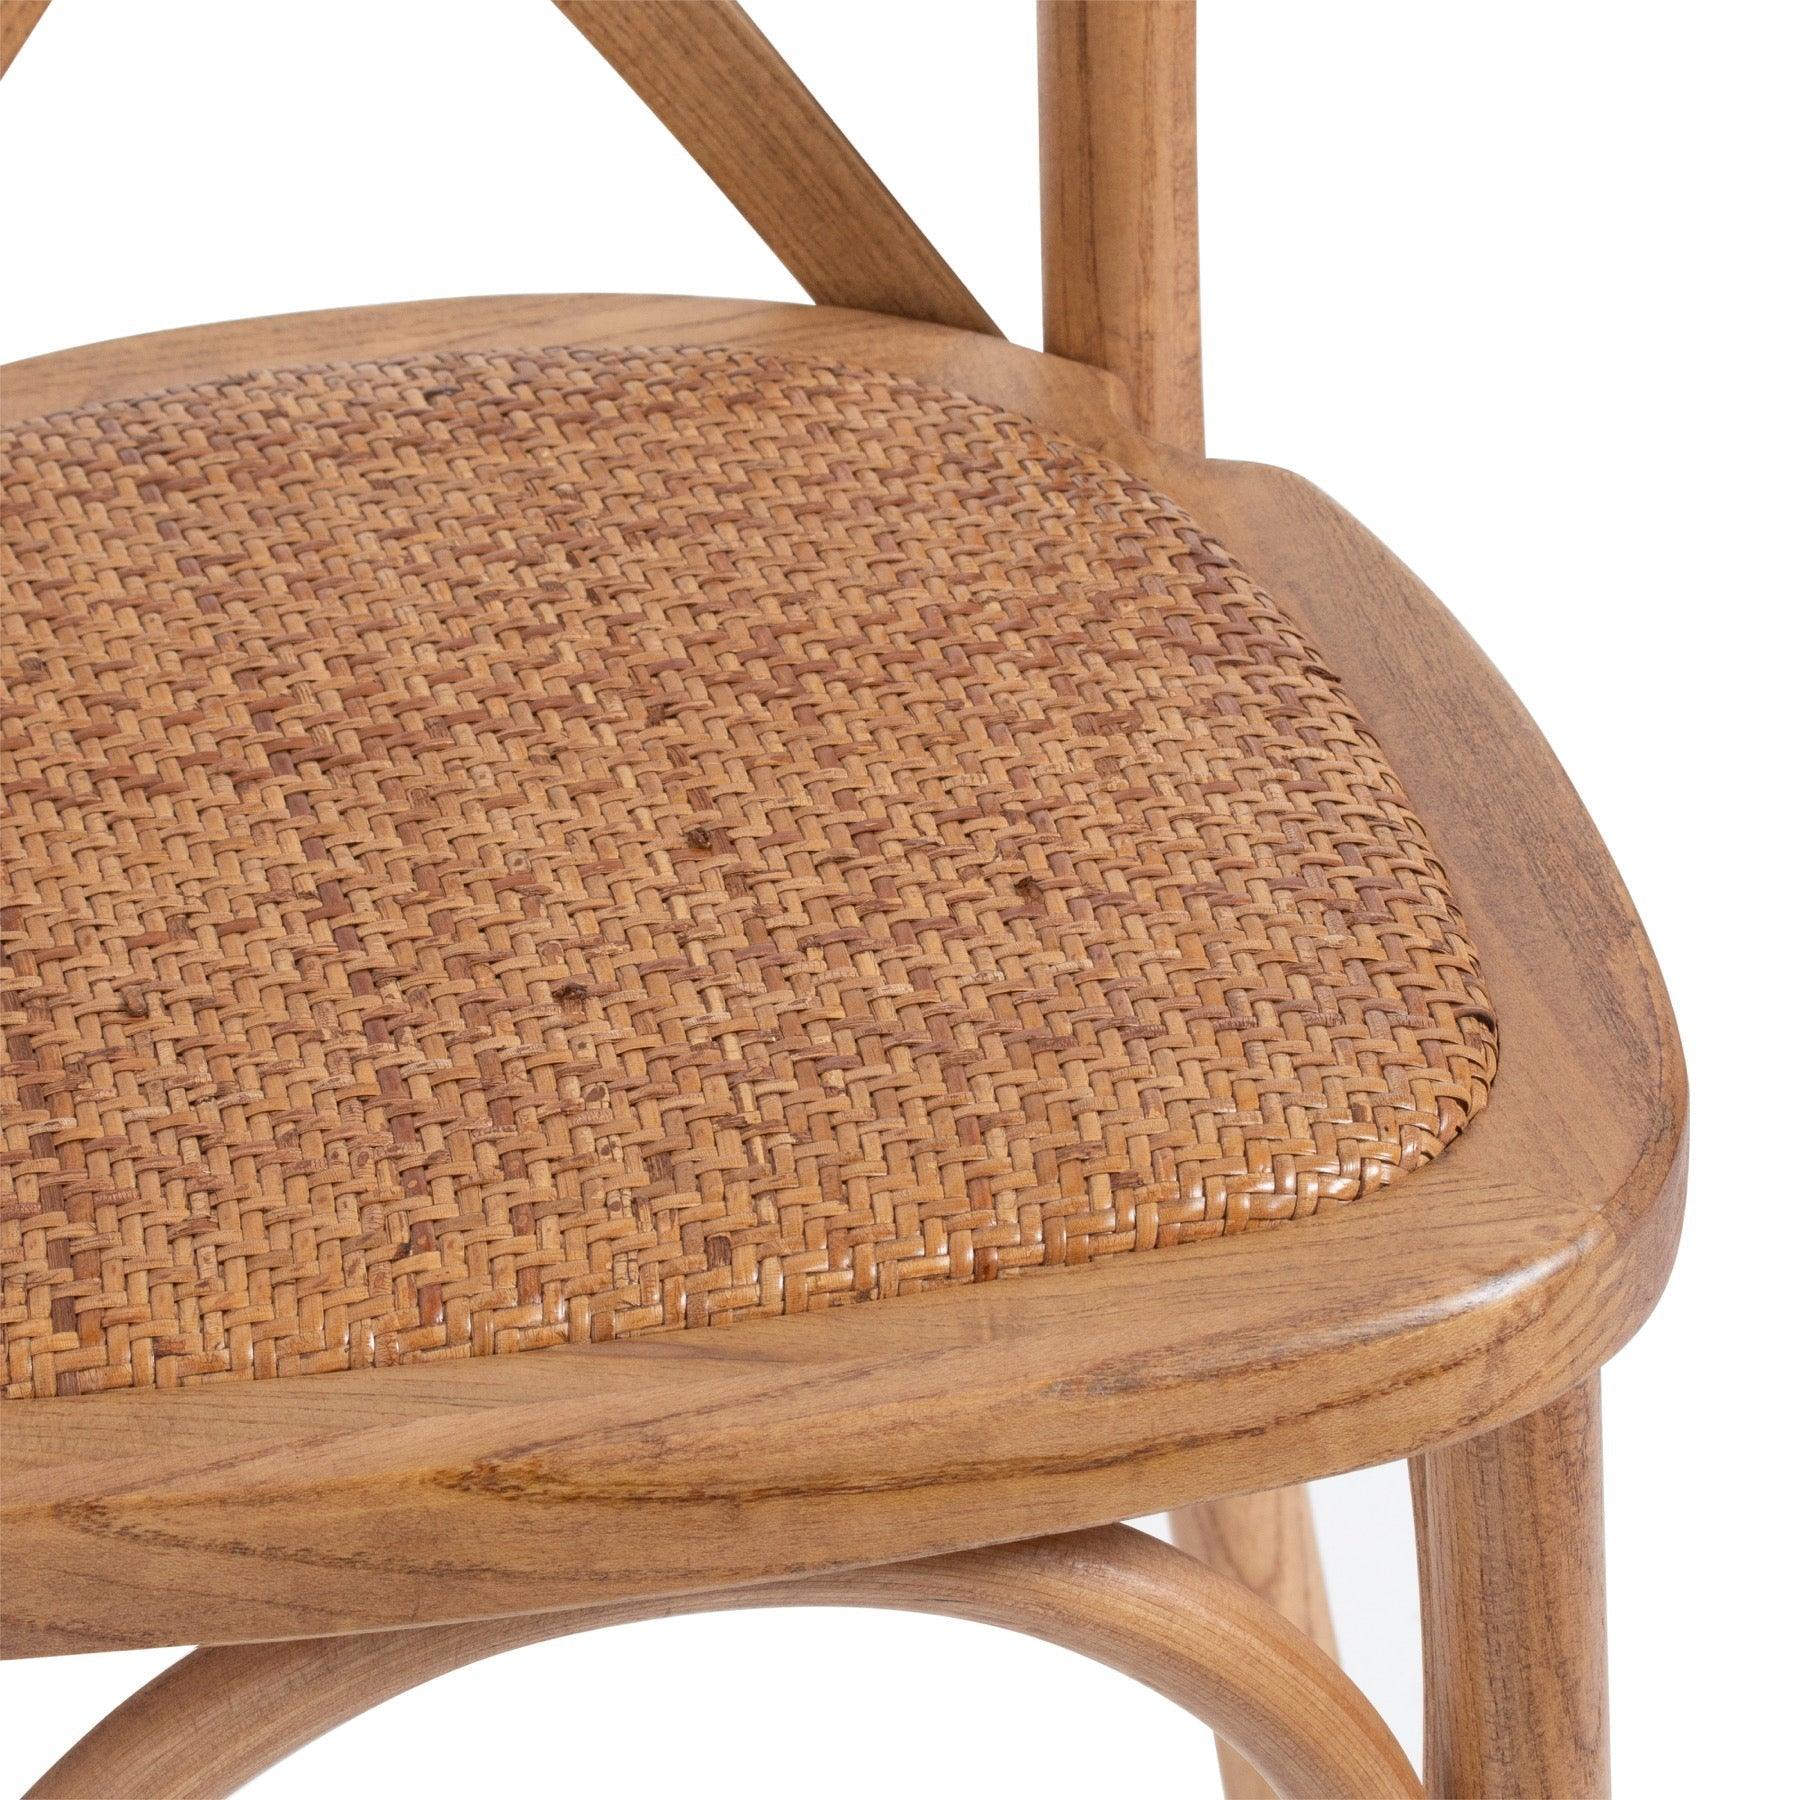 Light Oak Cross Back Dining Chair - Vookoo Lifestyle